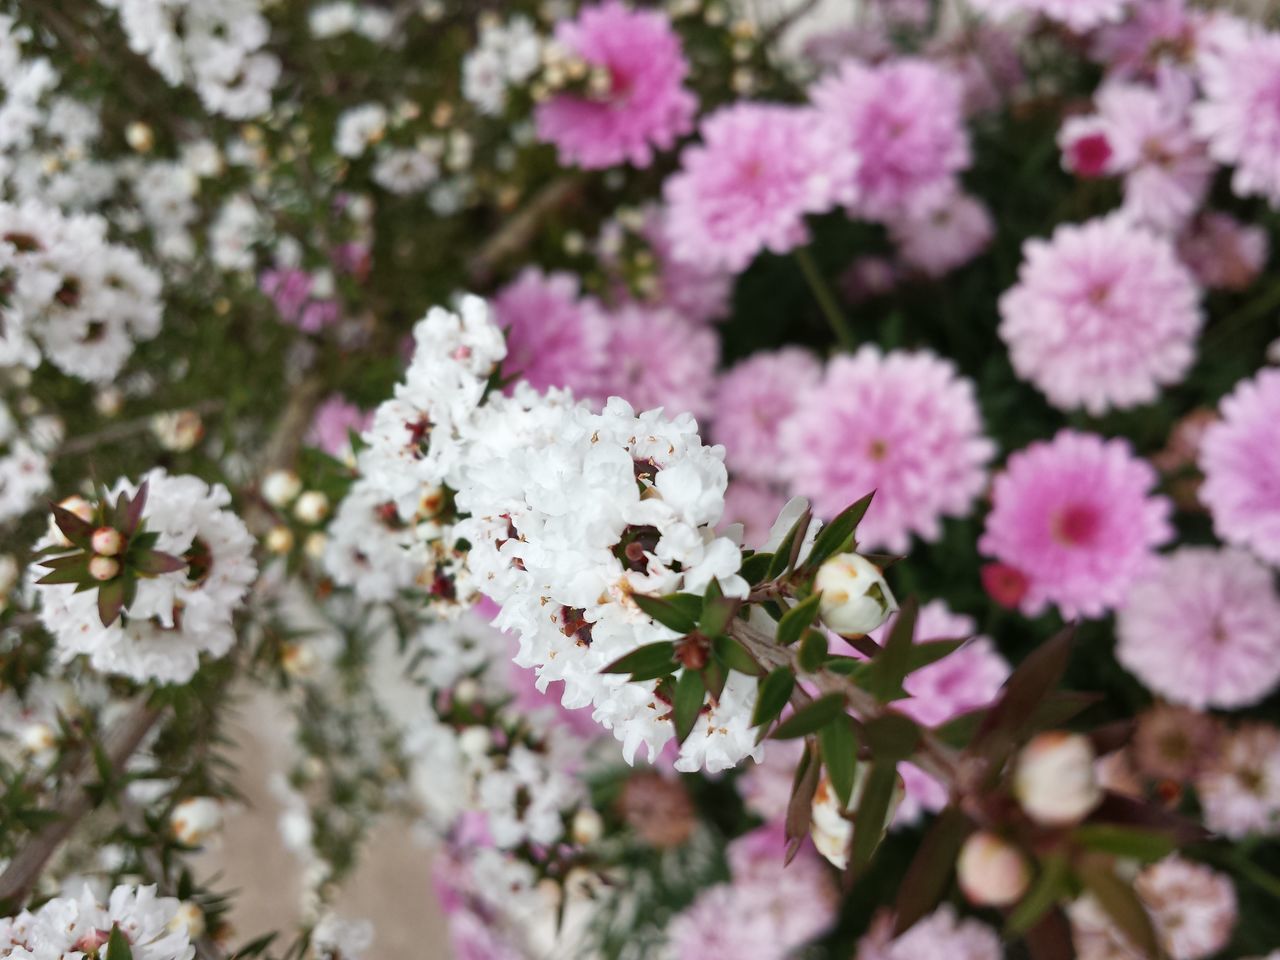 flower, freshness, fragility, growth, petal, beauty in nature, pink color, nature, blooming, flower head, focus on foreground, close-up, in bloom, plant, blossom, park - man made space, outdoors, selective focus, day, white color